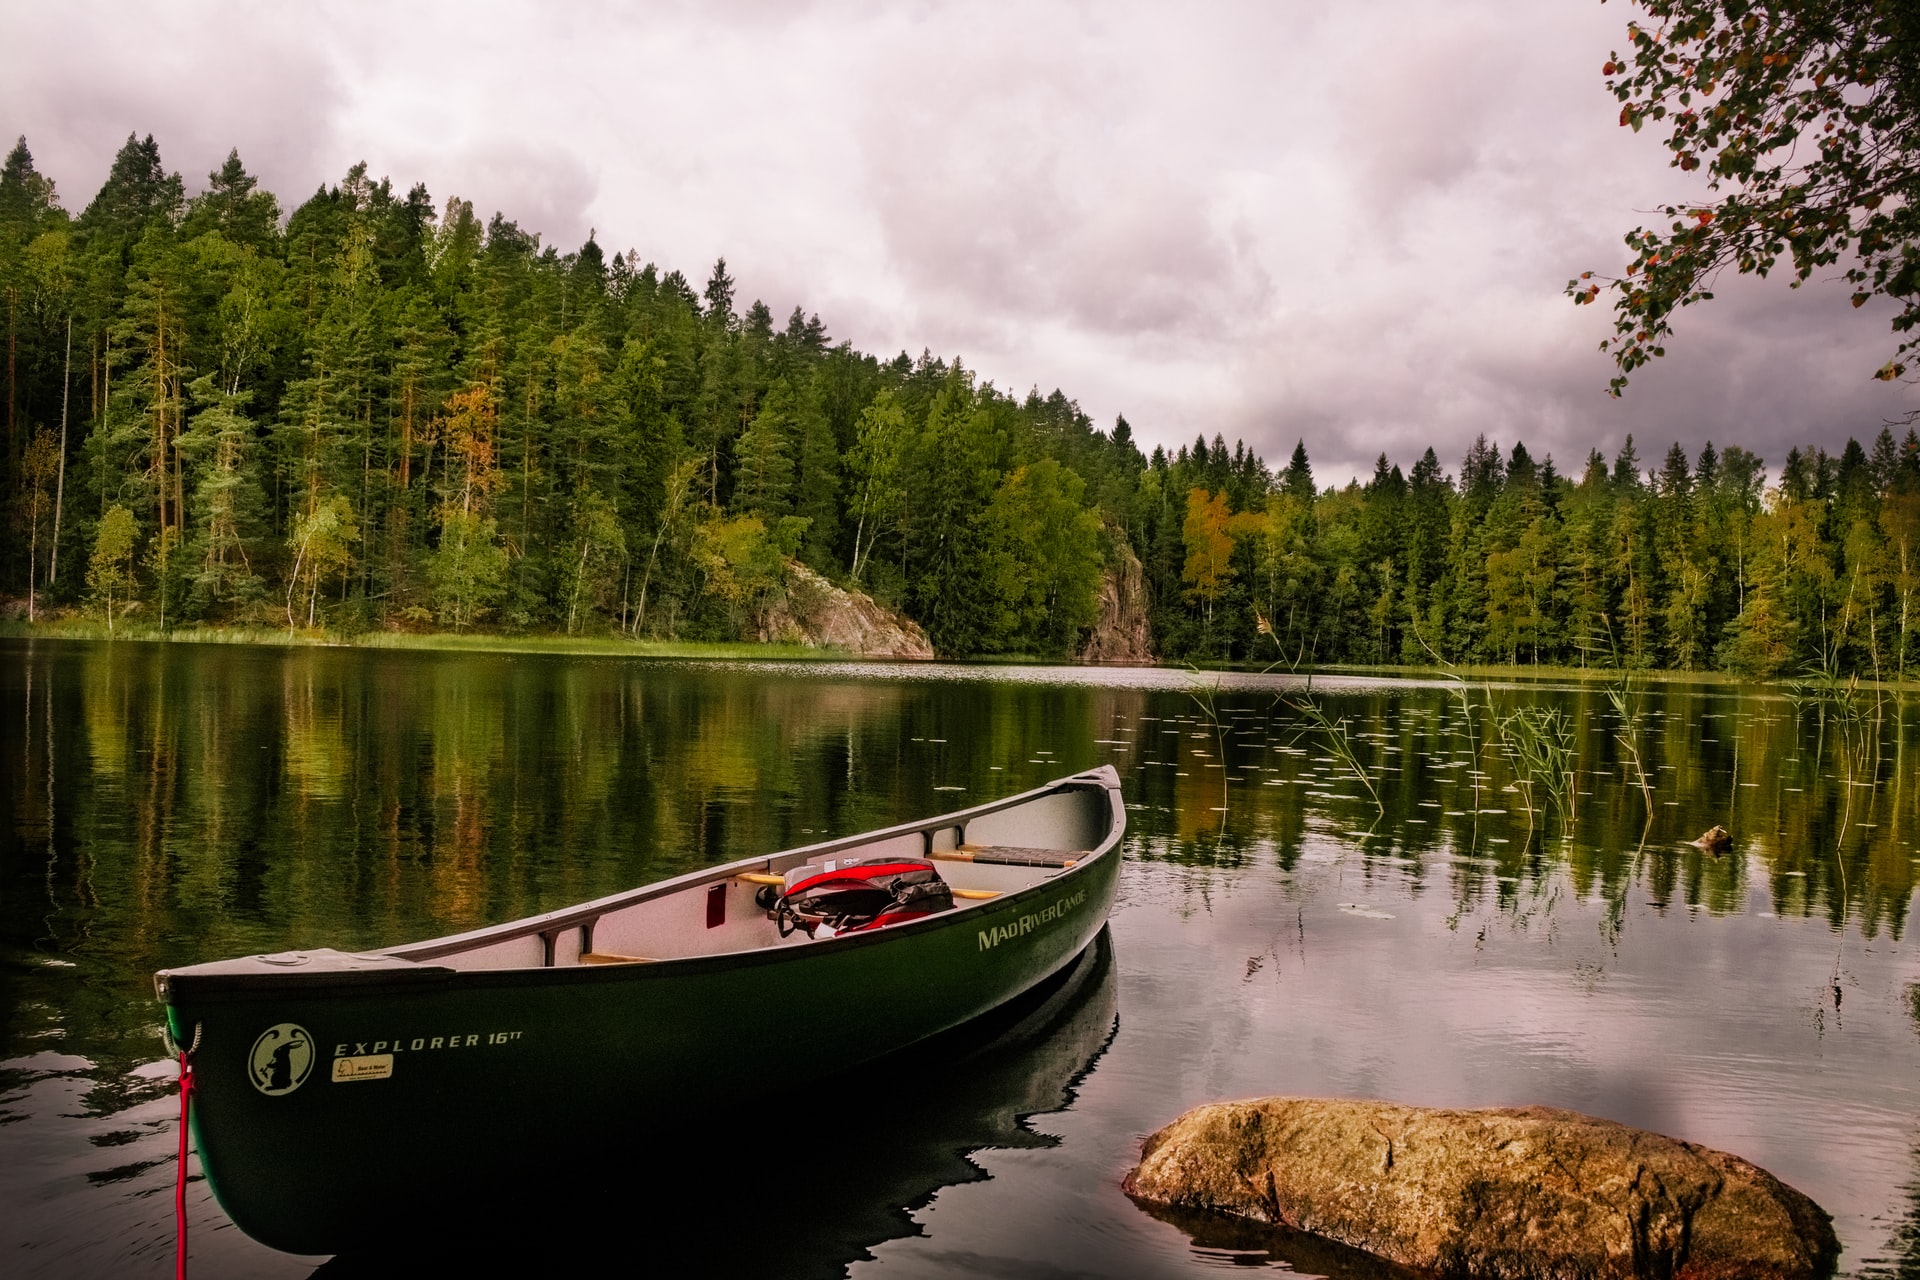 Canoe Weight Limit — How Much Can A Canoe Hold?